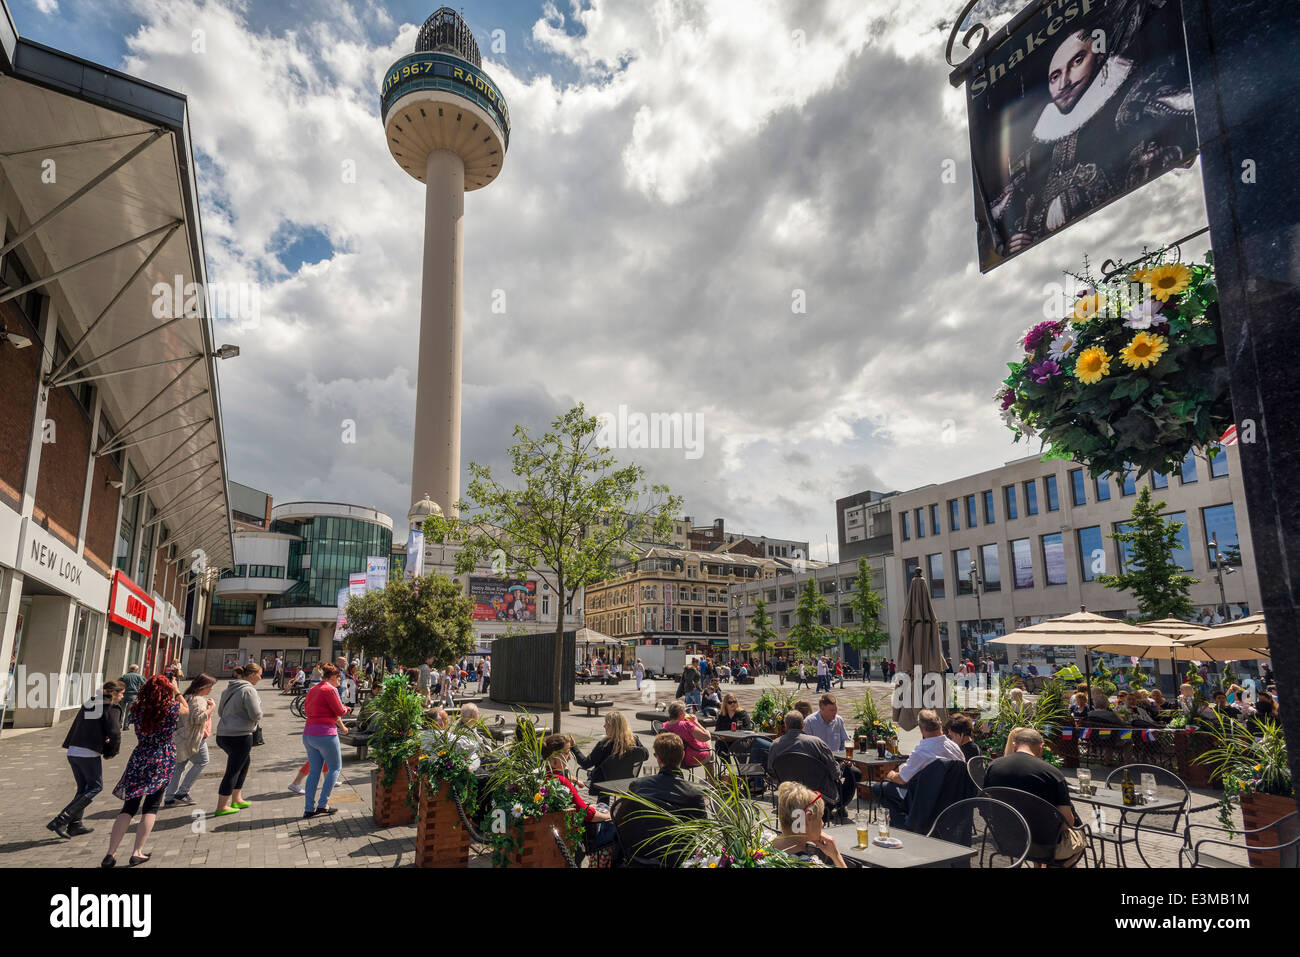 Williamson Square in the centre of Liverpool with the St. John's tower and Playhouse theatre on a sunny summer's day. Stock Photo